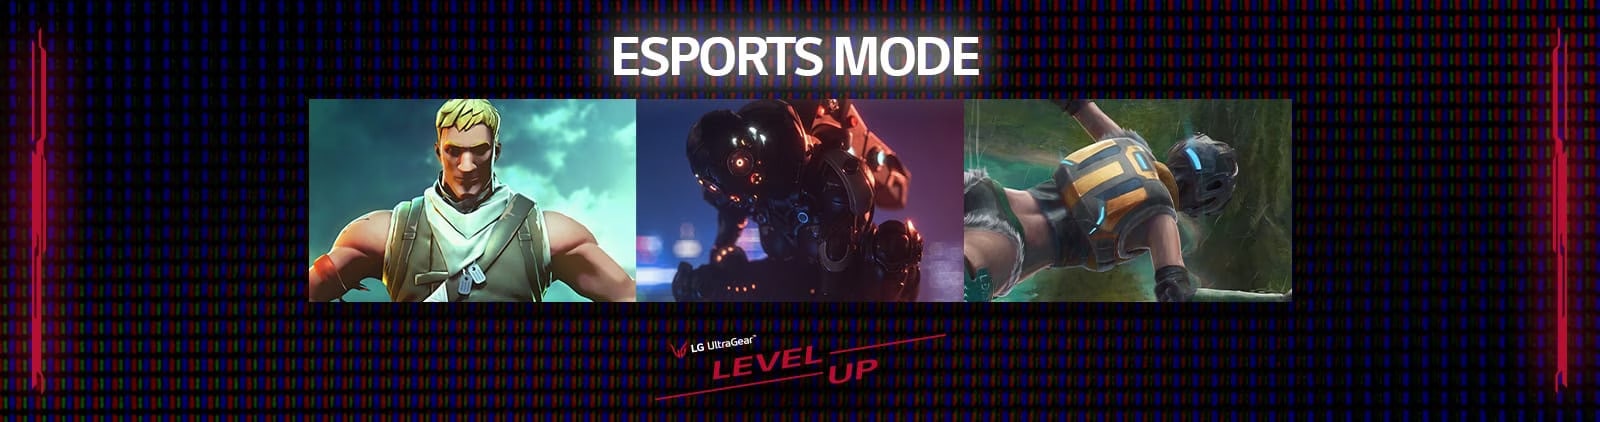 LG's Top 10 Esports Game Picks in 2021